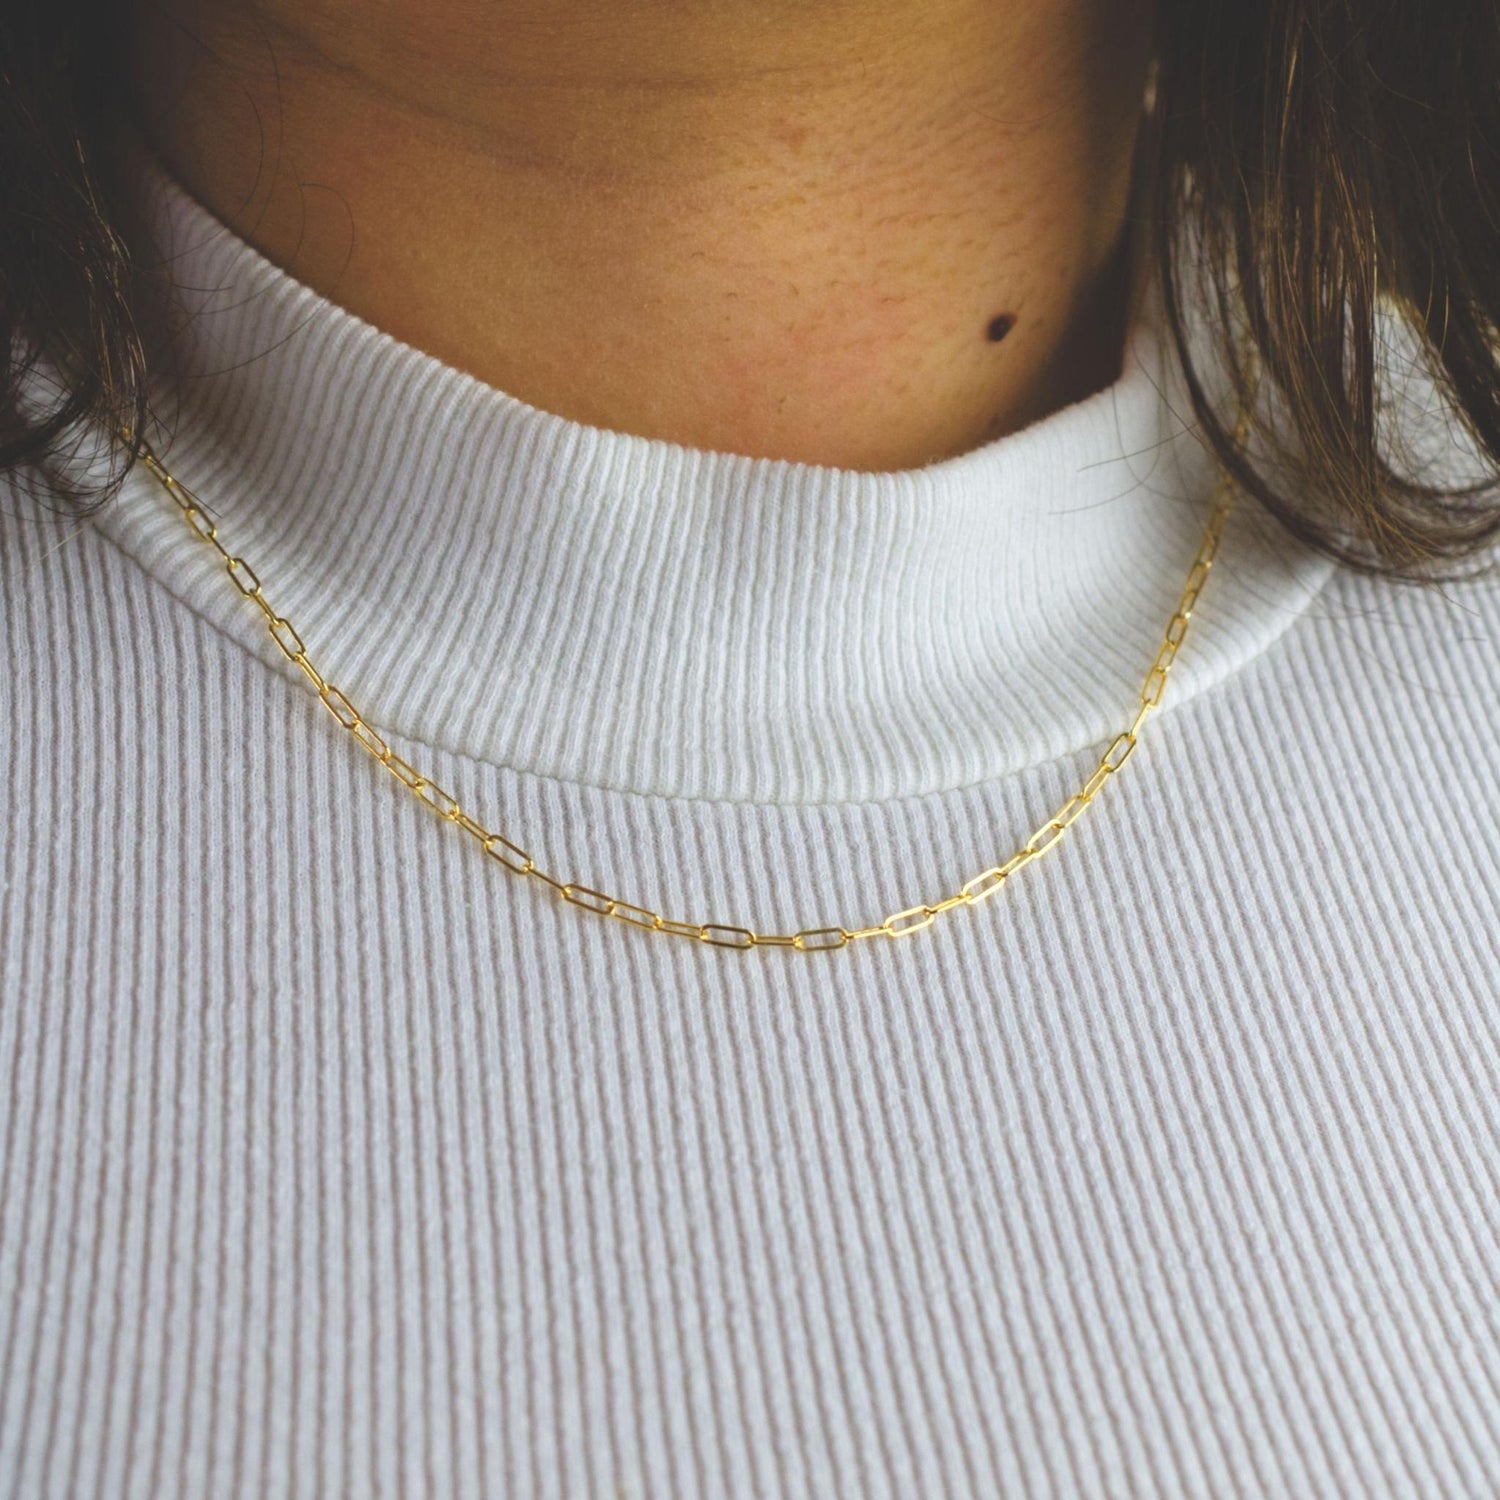 Woman wearing a 14K gold fill paperclip chain necklace with minimalist style (small) link size